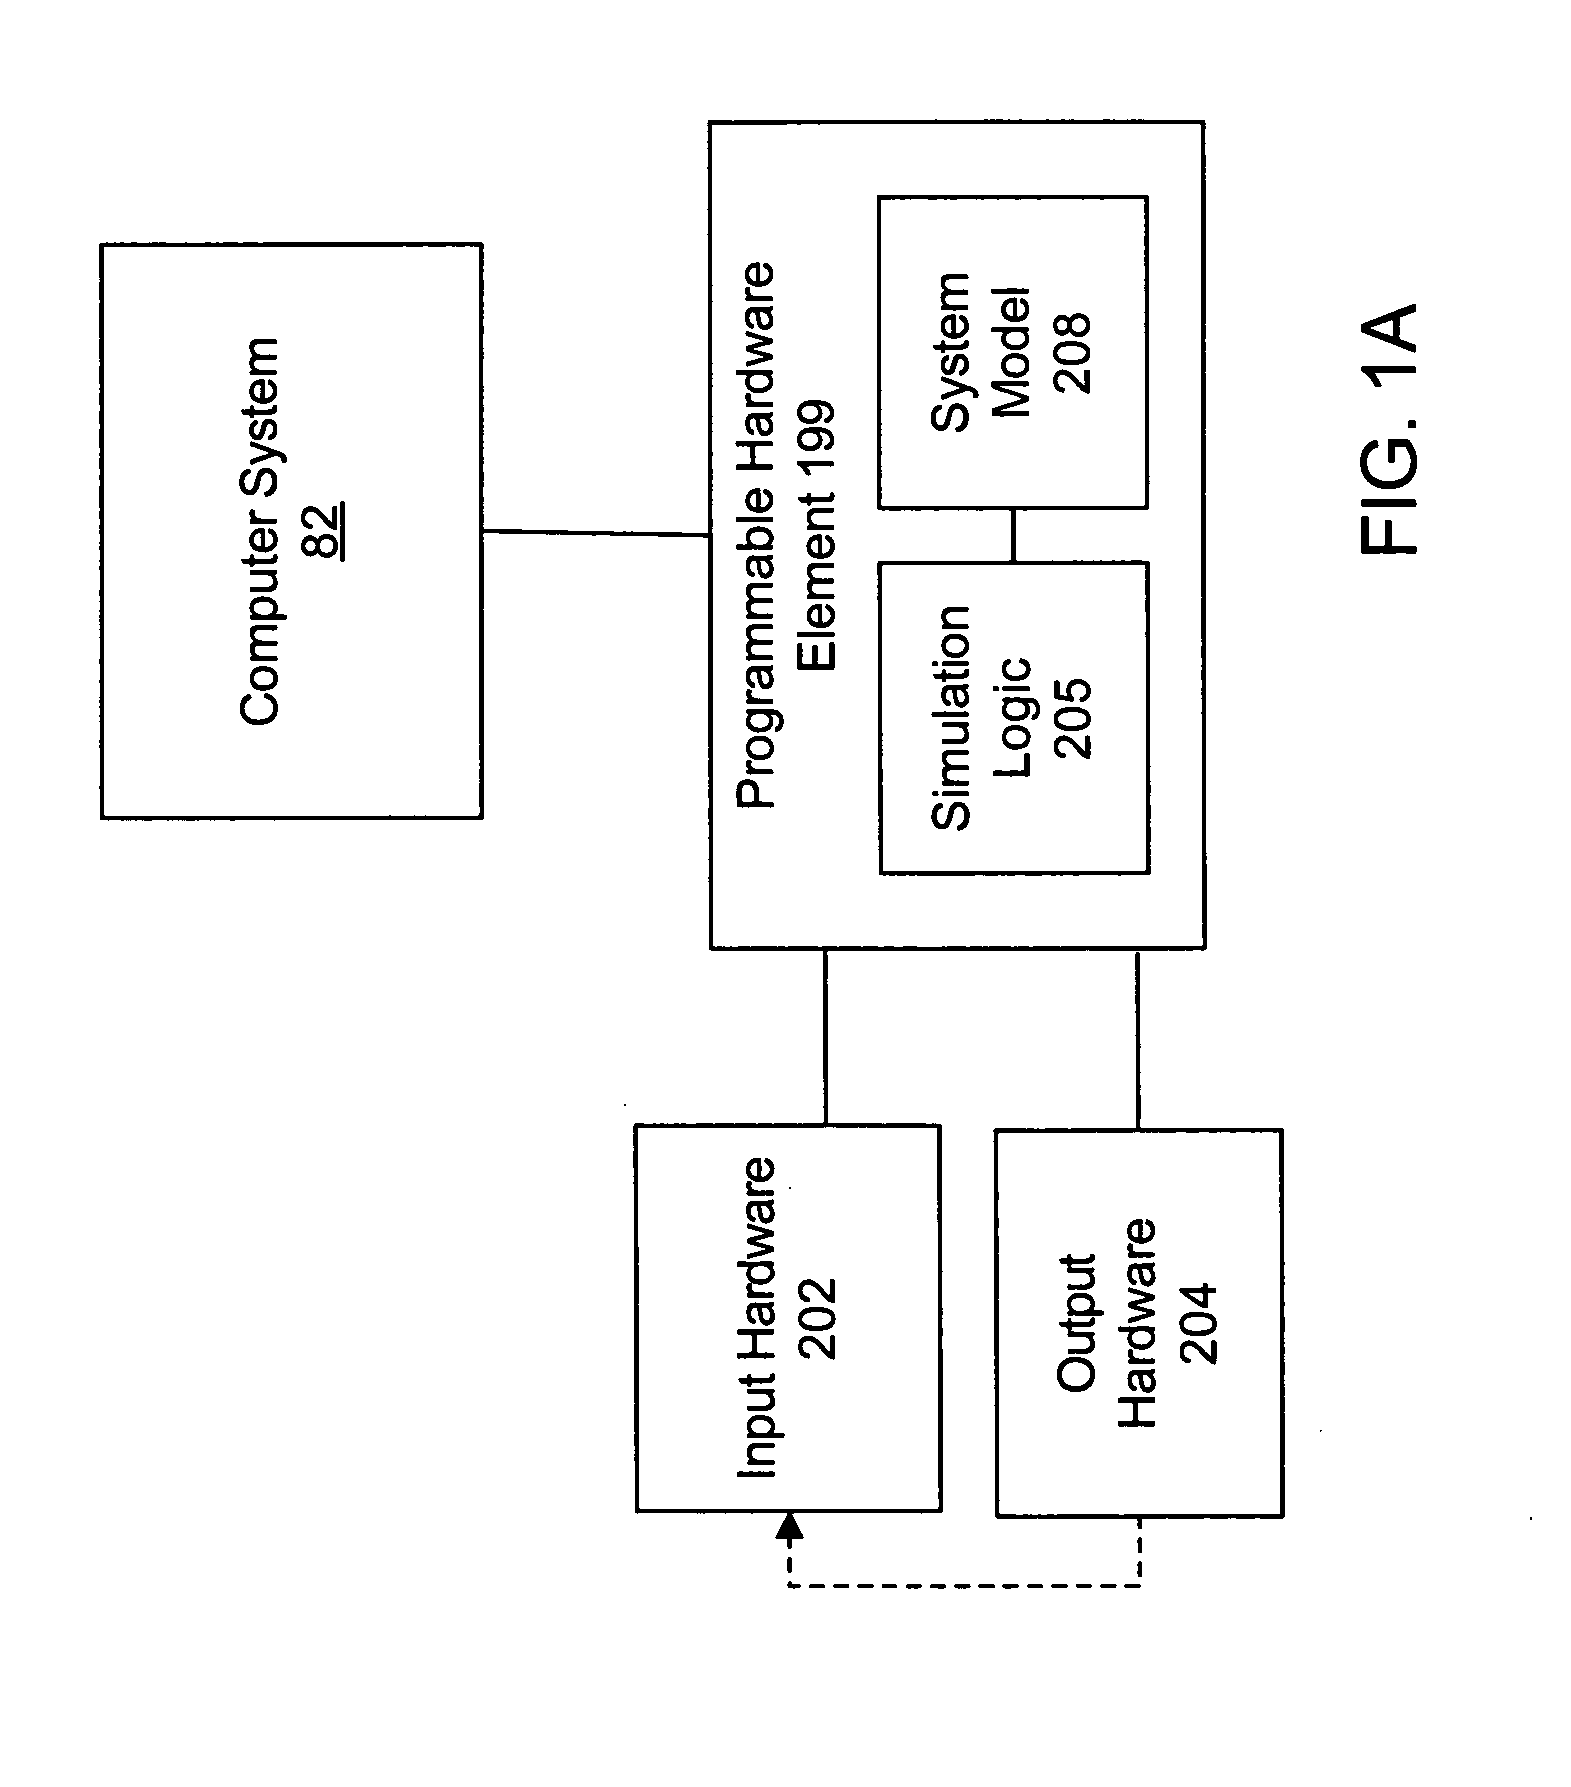 Solver for simulating a system in real time on a programmable hardware element